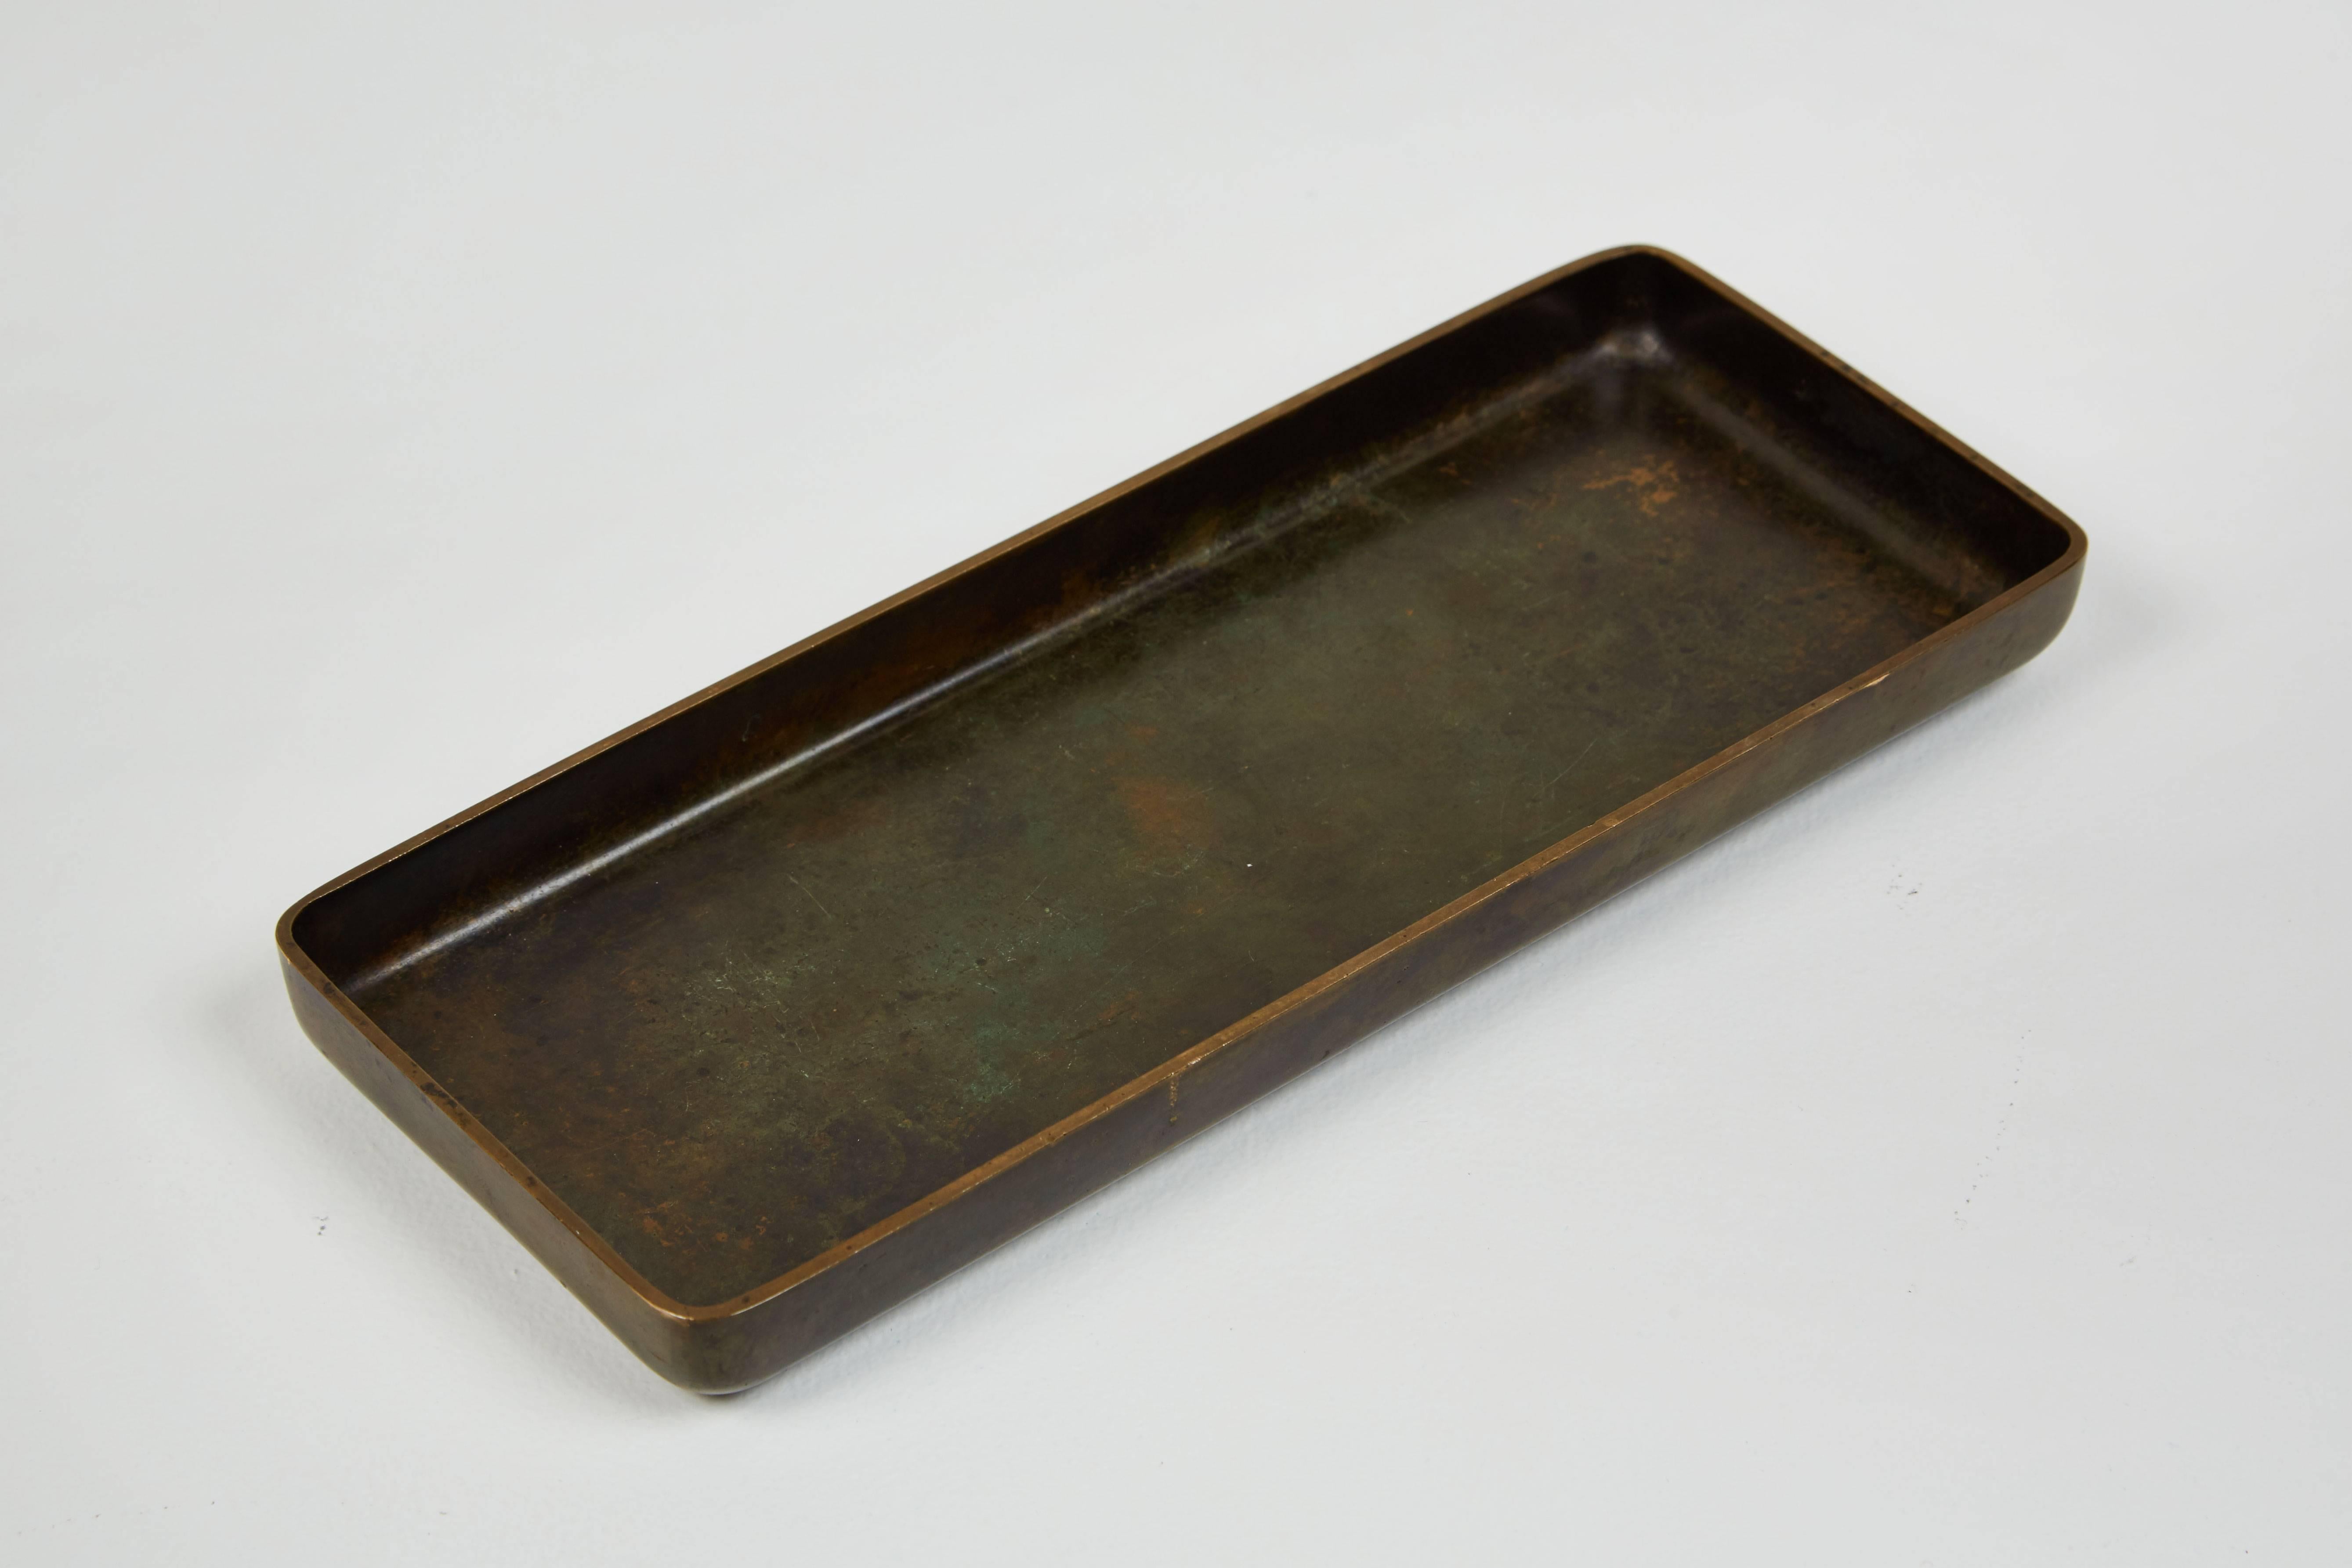 Solid bronze footed tray by Just Andersen, made in Denmark, circa 1930s.